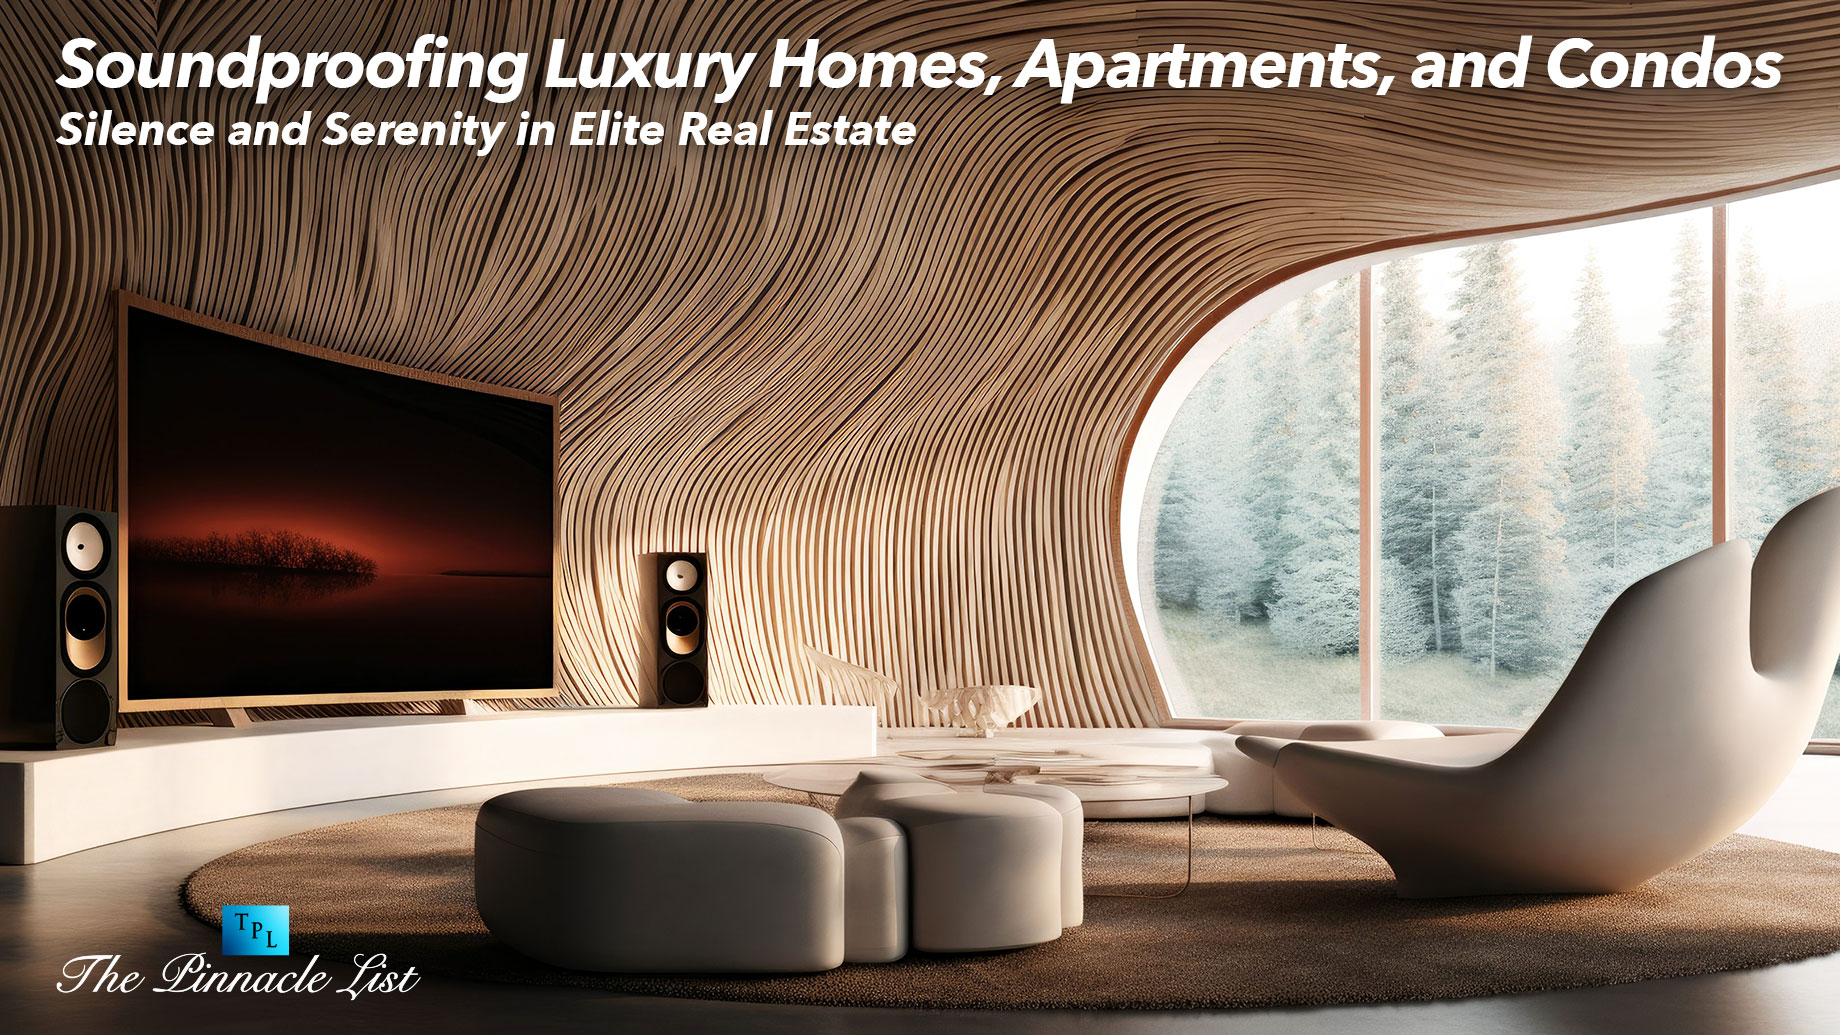 Soundproofing Luxury Homes, Apartments, and Condos: Silence and Serenity in Elite Real Estate